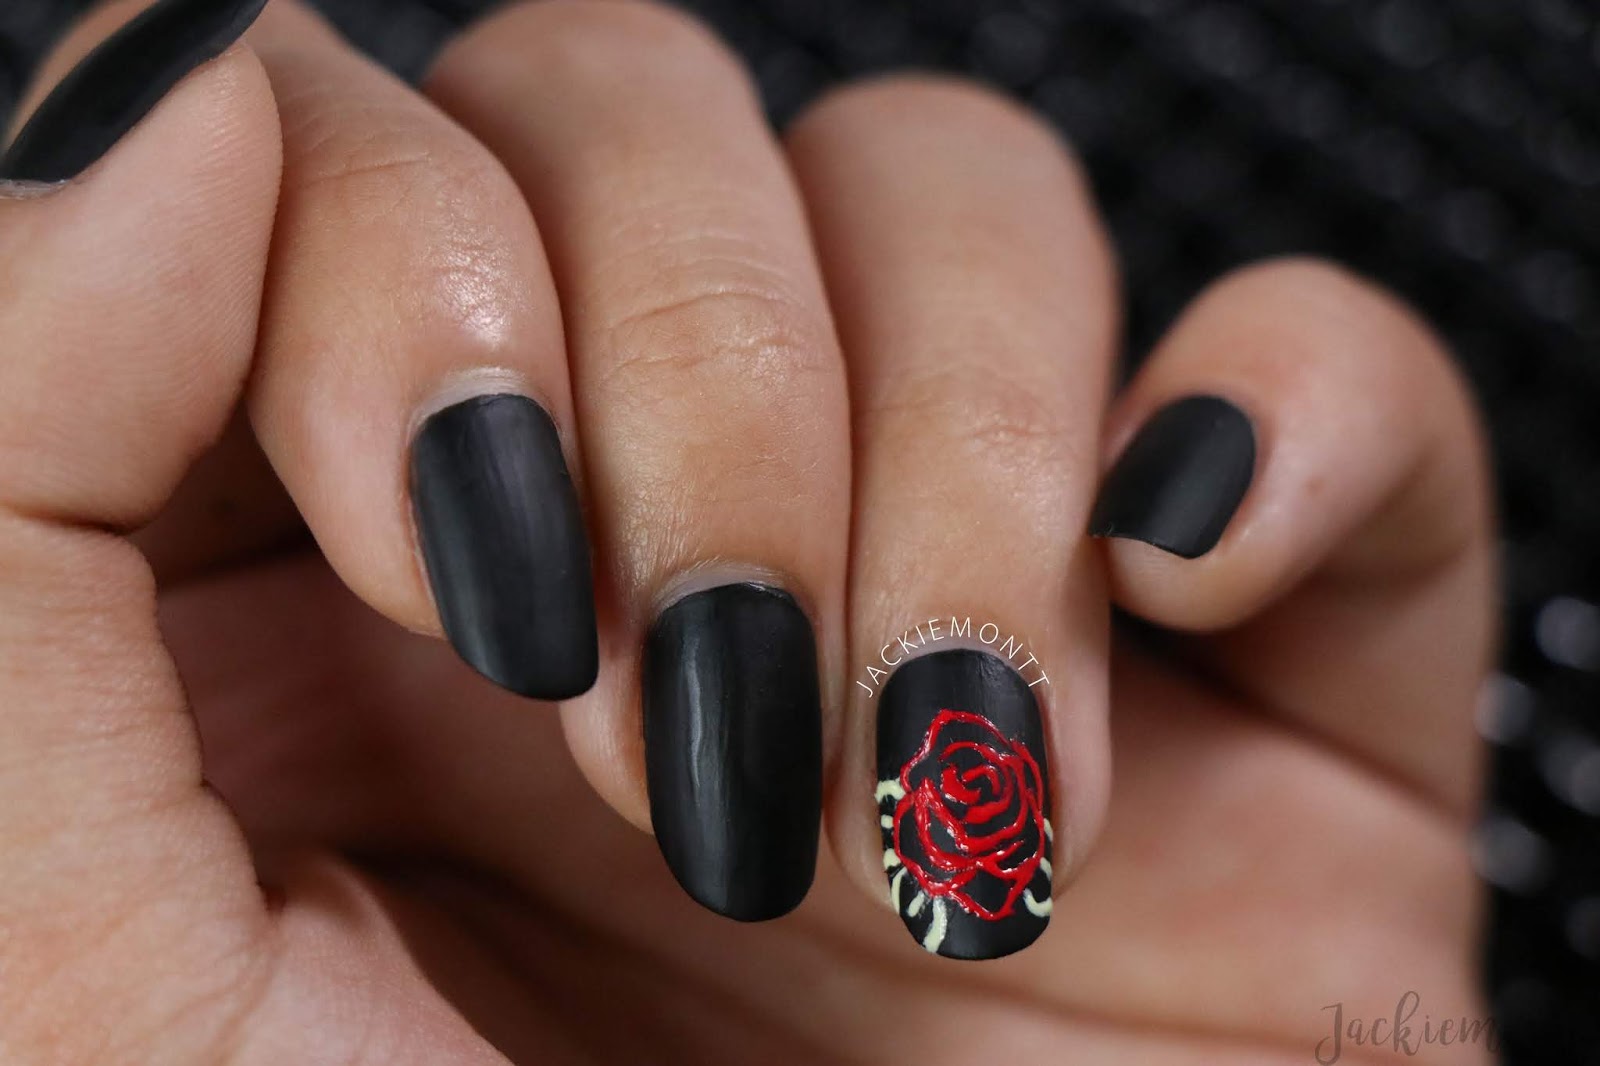 Skull and Rose Nail Art Designs - wide 8